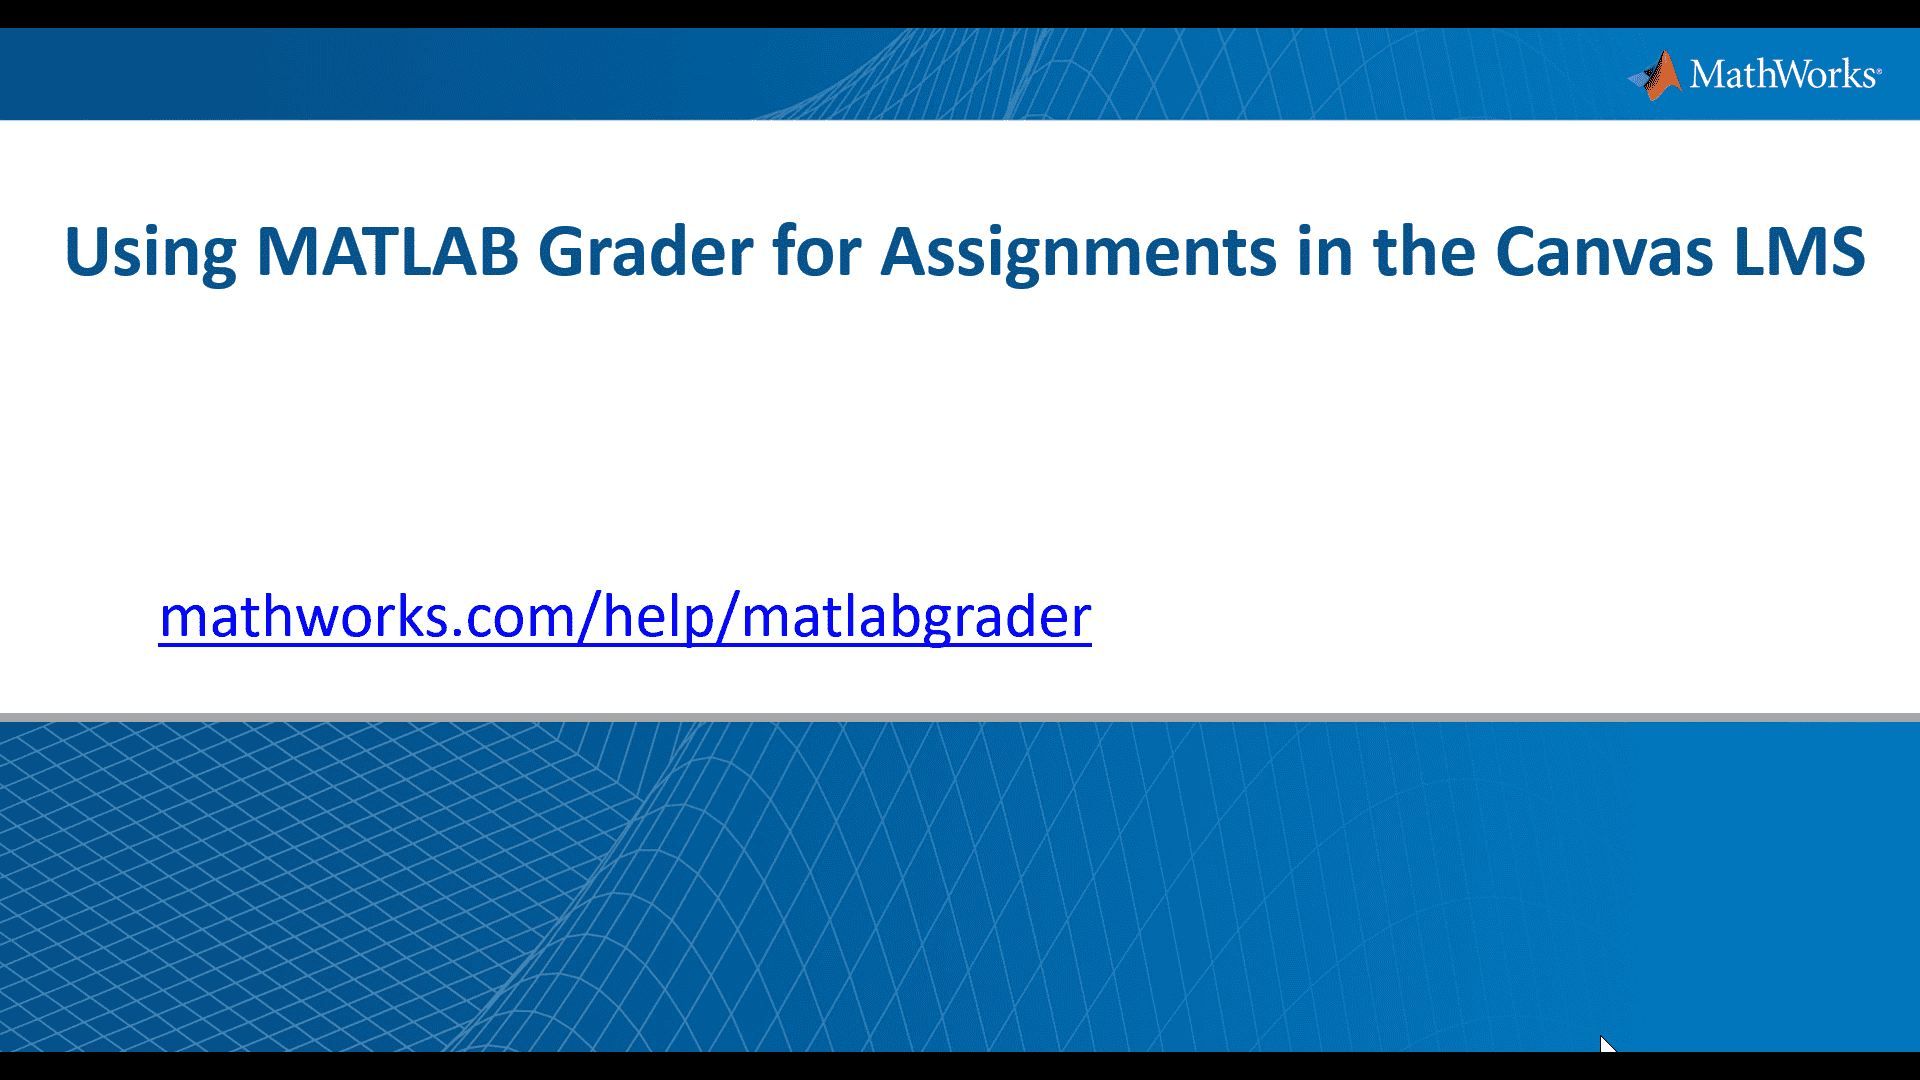 Learn how instructors can add automatically graded MATLAB-based assignments to their Canvas learning management system using MATLAB Grader.